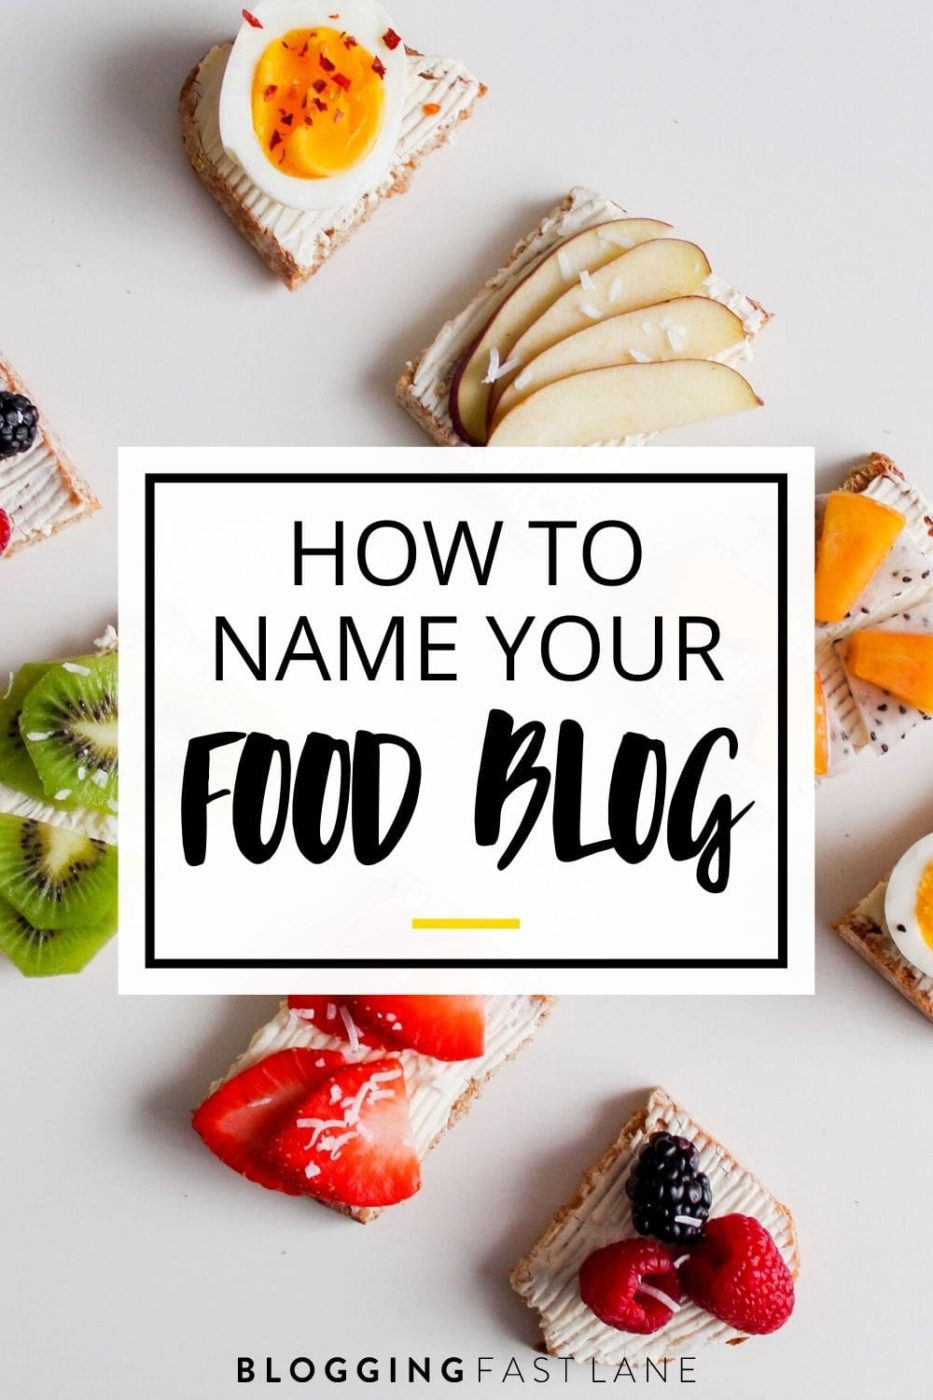 Food Blog Names | Trying to come up with a food blog name? Check out our list of 40 food blog names for every niche, as well as tips for how to come up with a name yourself!